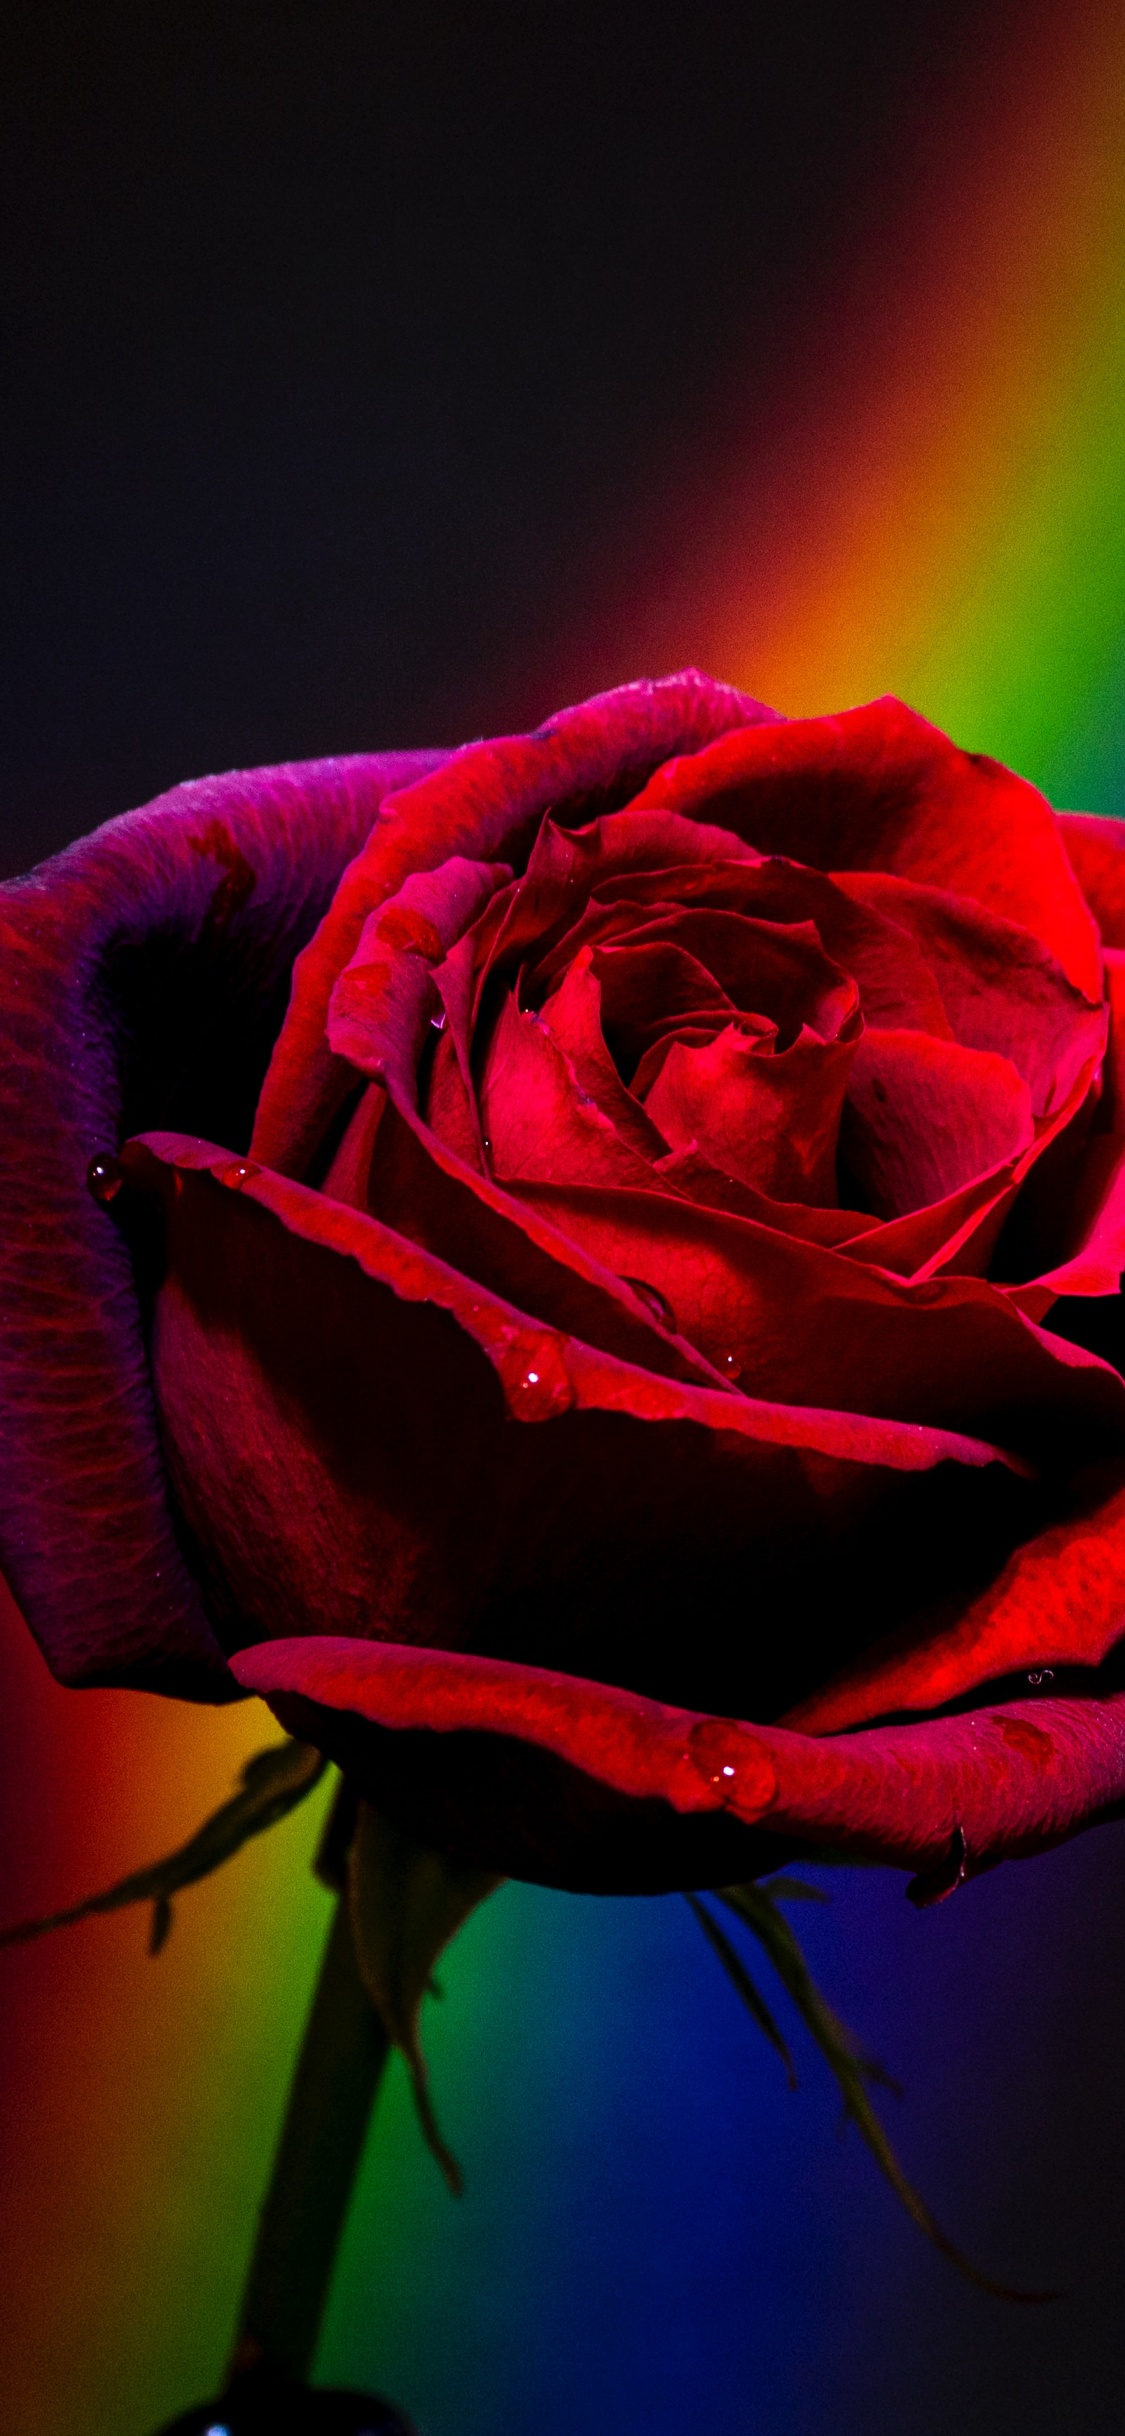 Blue rose and a heart made ​​of rose petals Desktop wallpapers 1920x1080